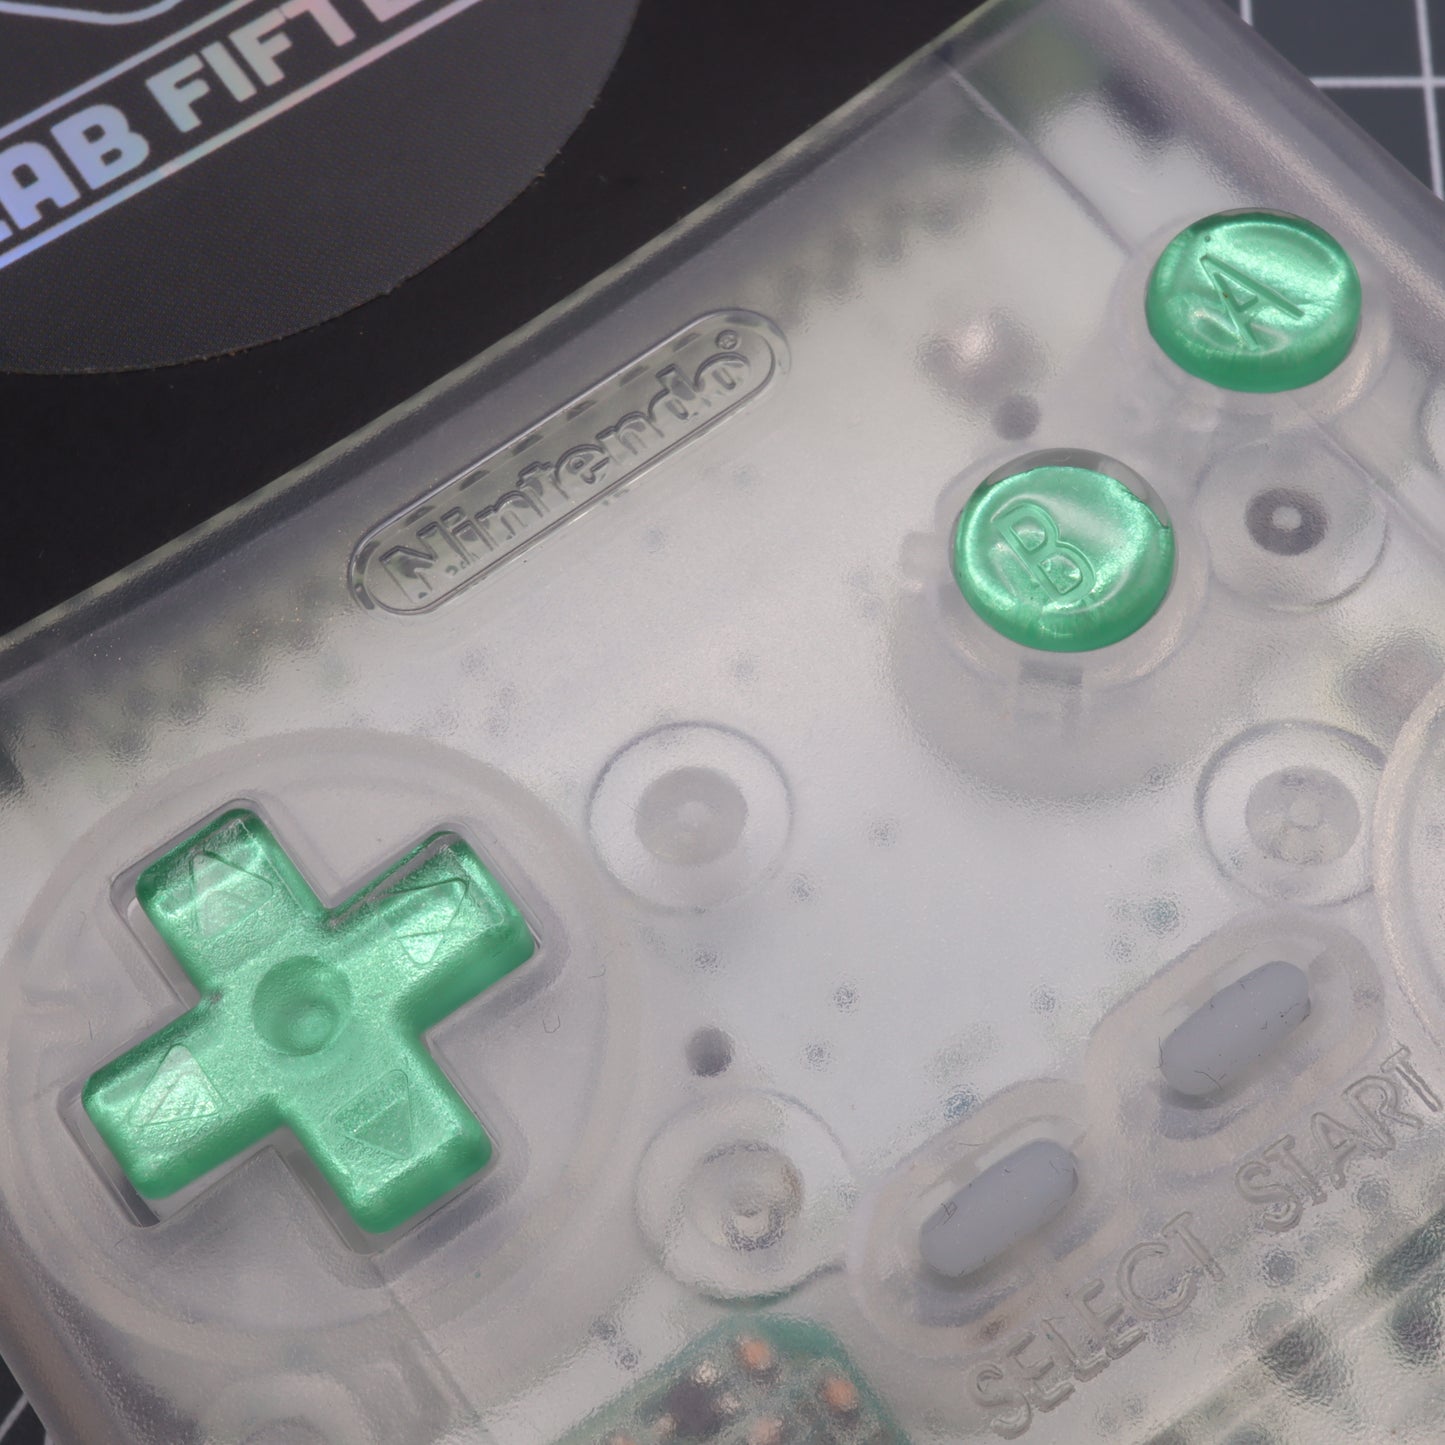 Game Boy Color button with lab fifteen co chrome mint green custom buttons inside clear transparent shell